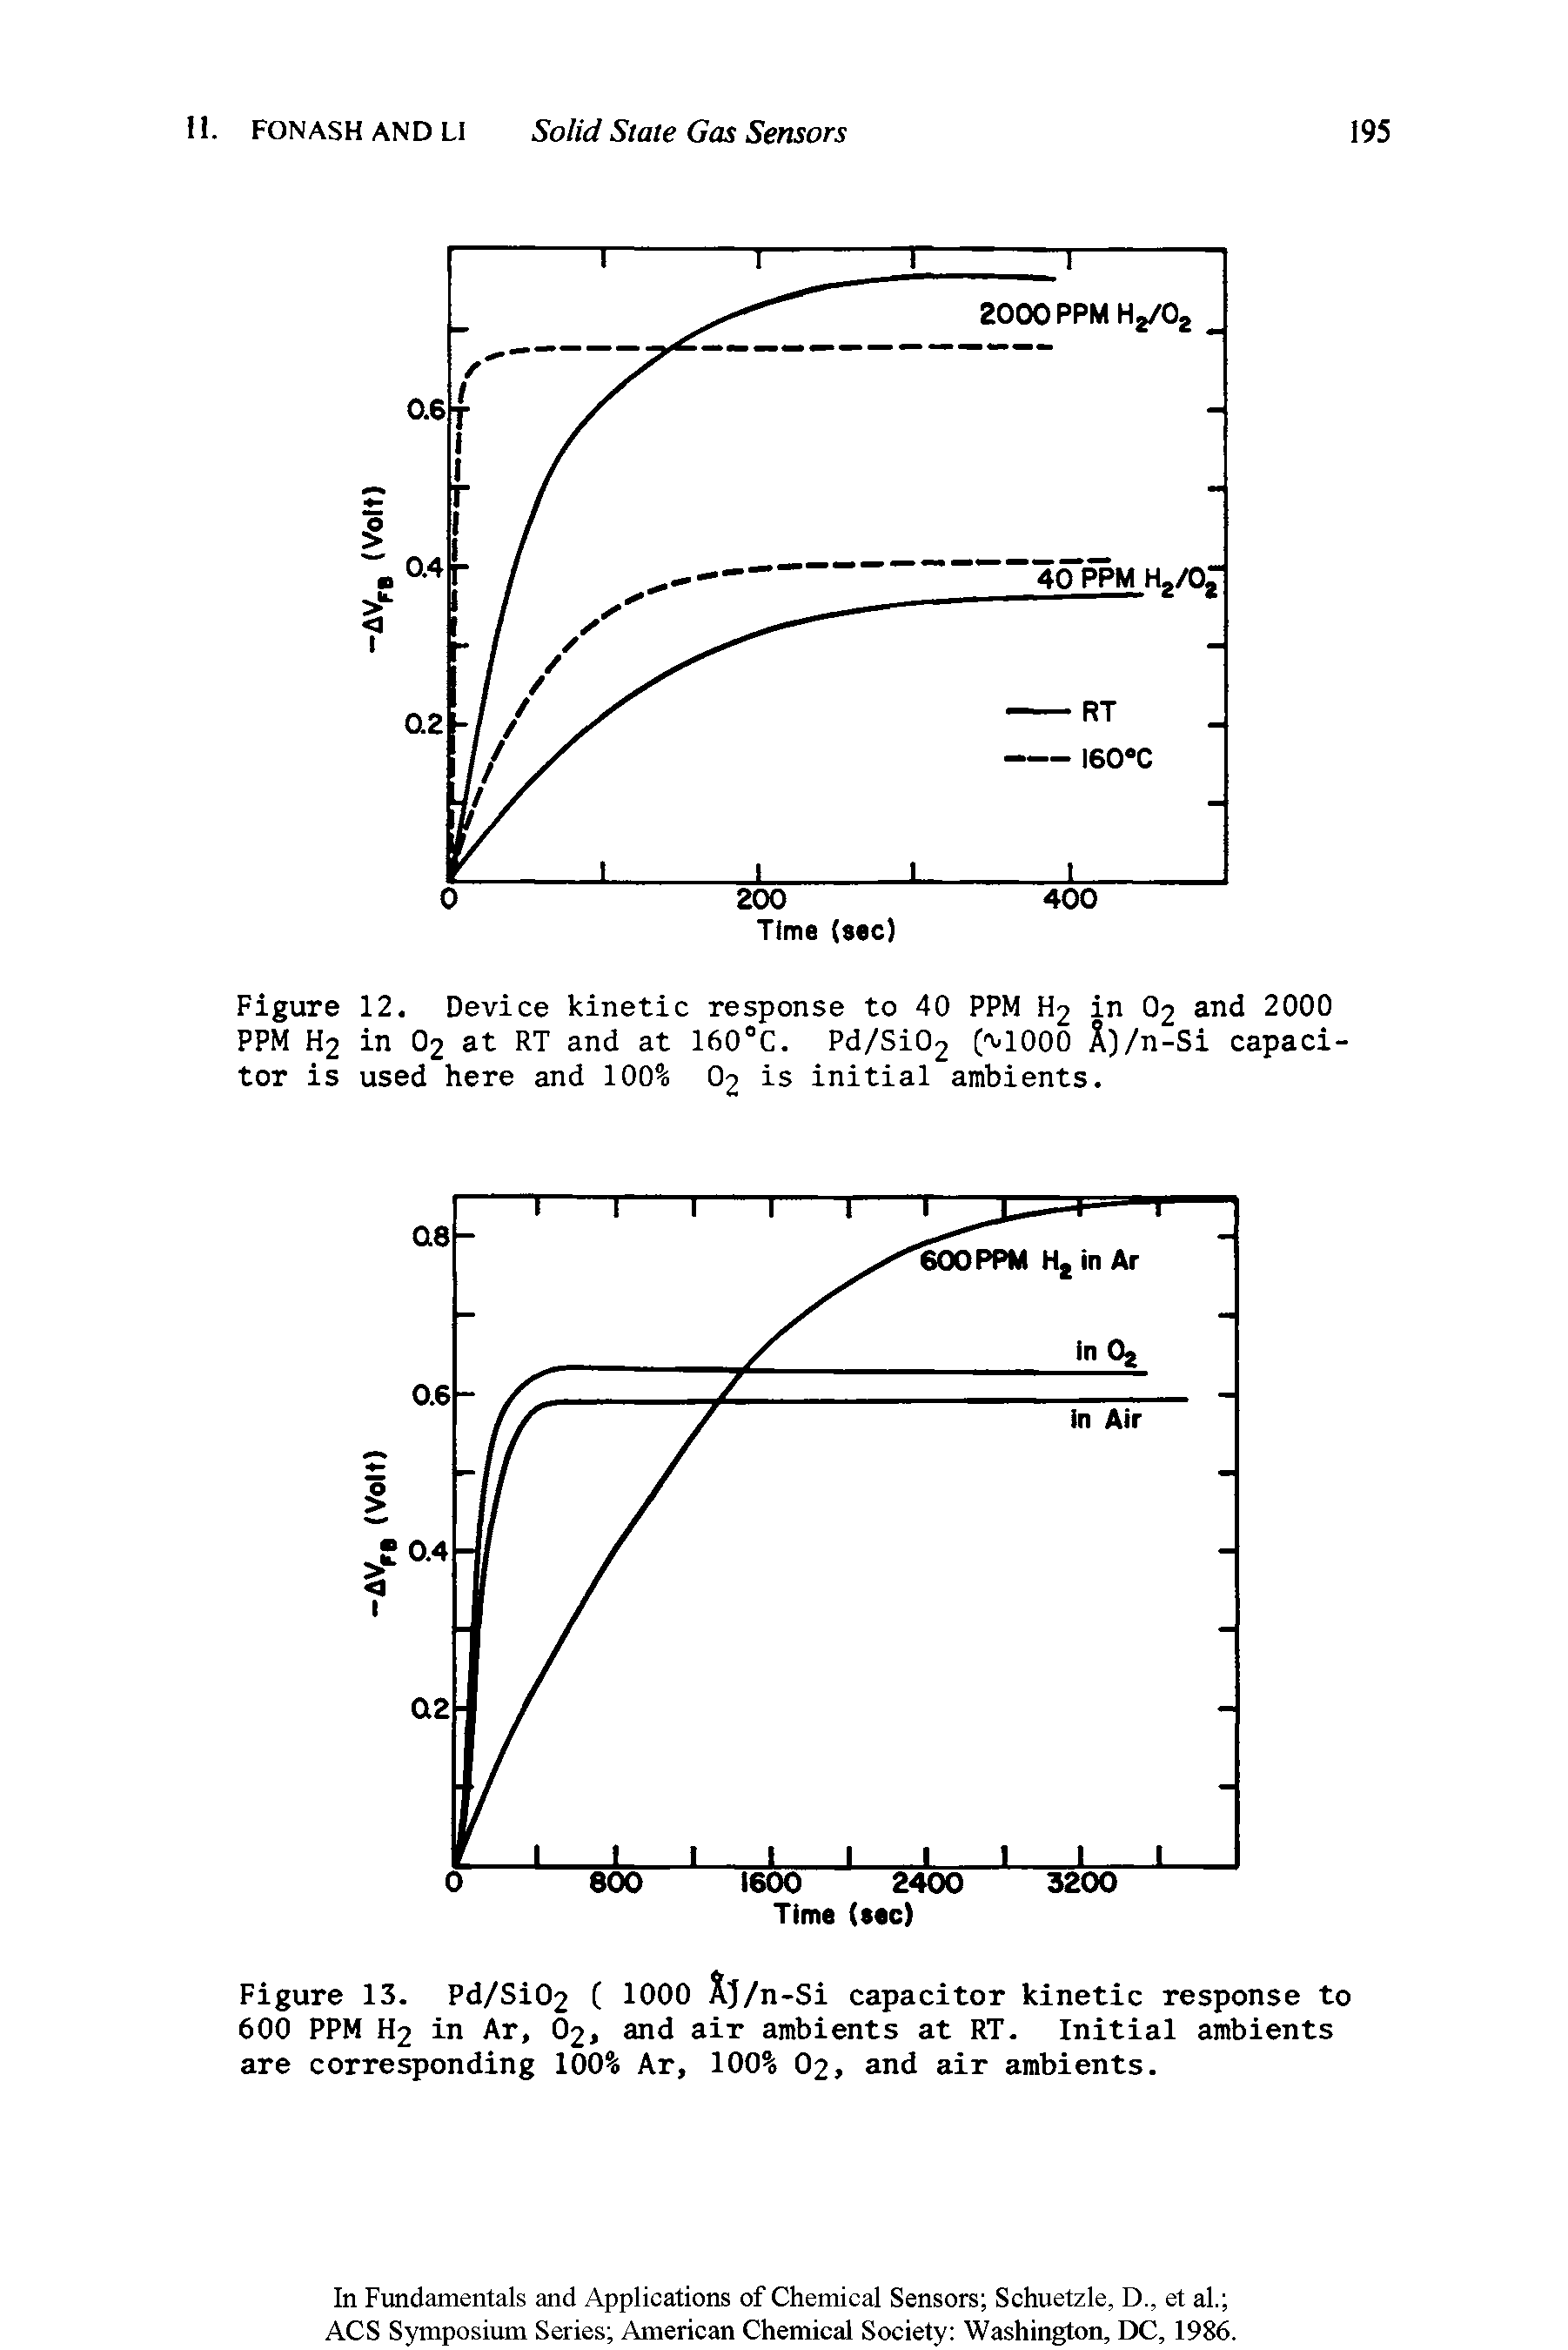 Figure 13. Pd/Si02 ( 1000 Xj/n-Si capacitor kinetic response to 600 PPM H2 in Ar, O2, and air ambients at RT. Initial ambients are corresponding 100% Ar, 100% O2, and air ambients.